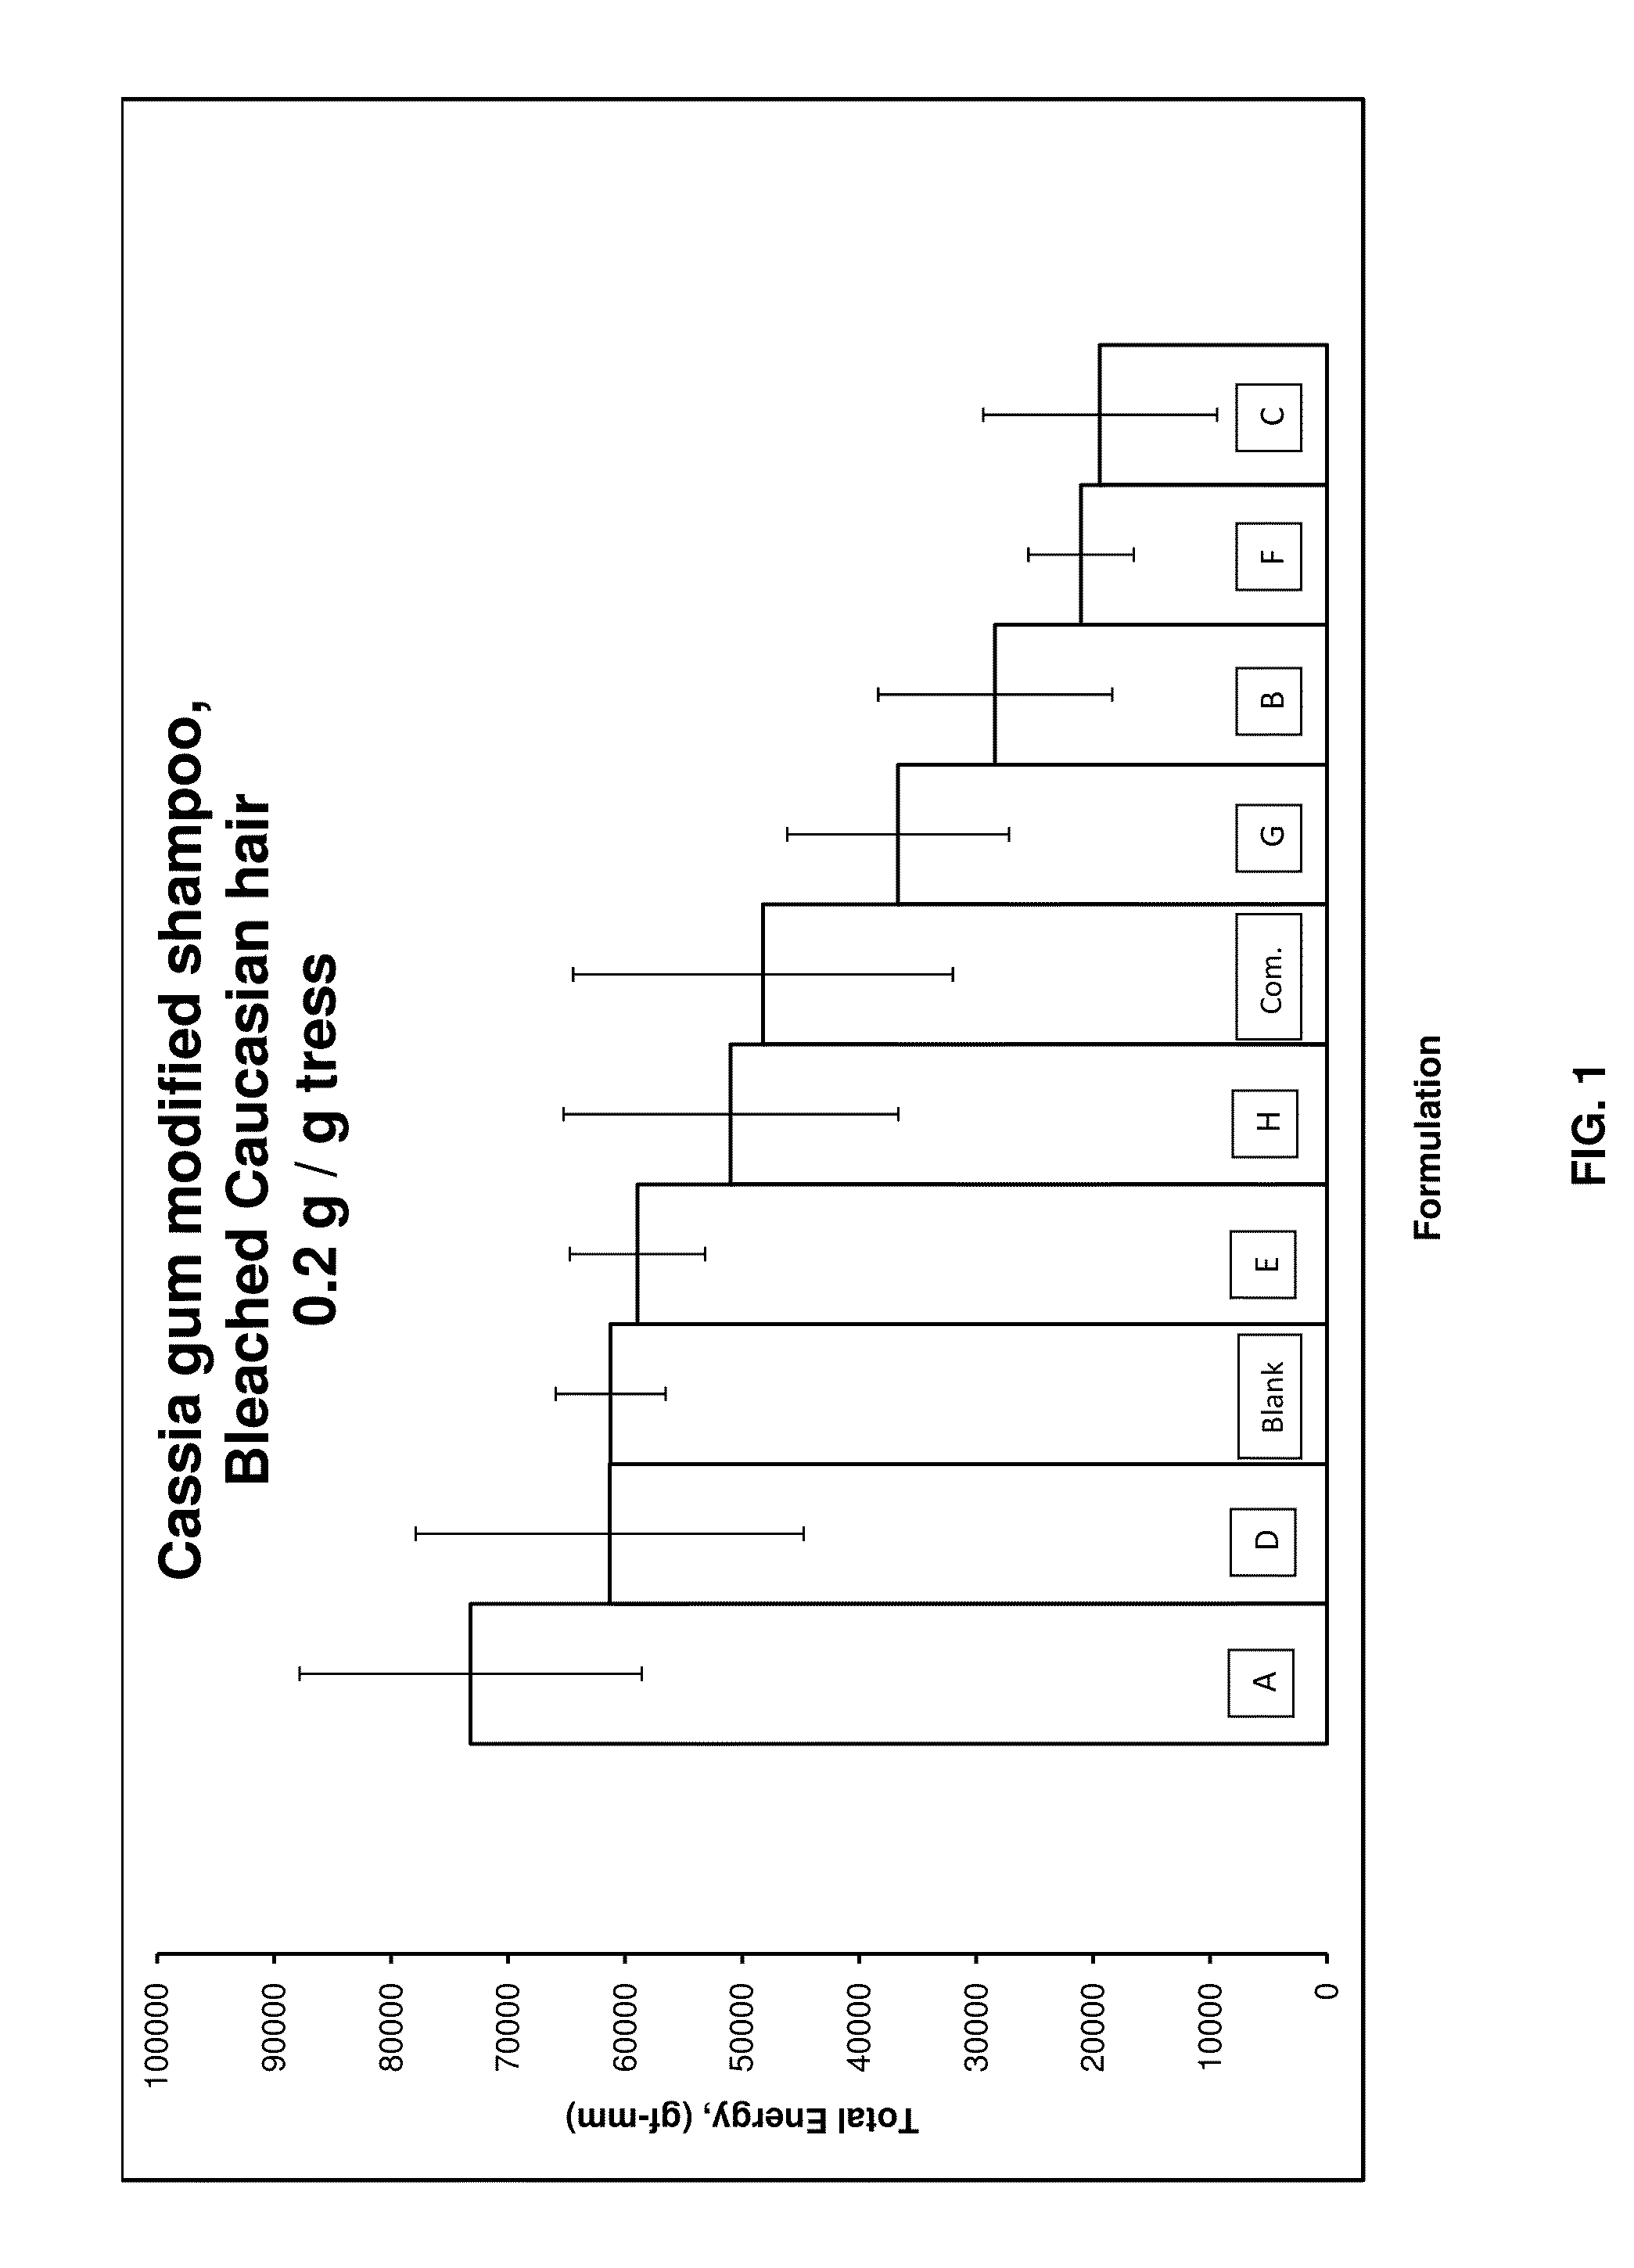 Dihydroxyalkyl substituted polygalactomannan, and methods for producing and using the same